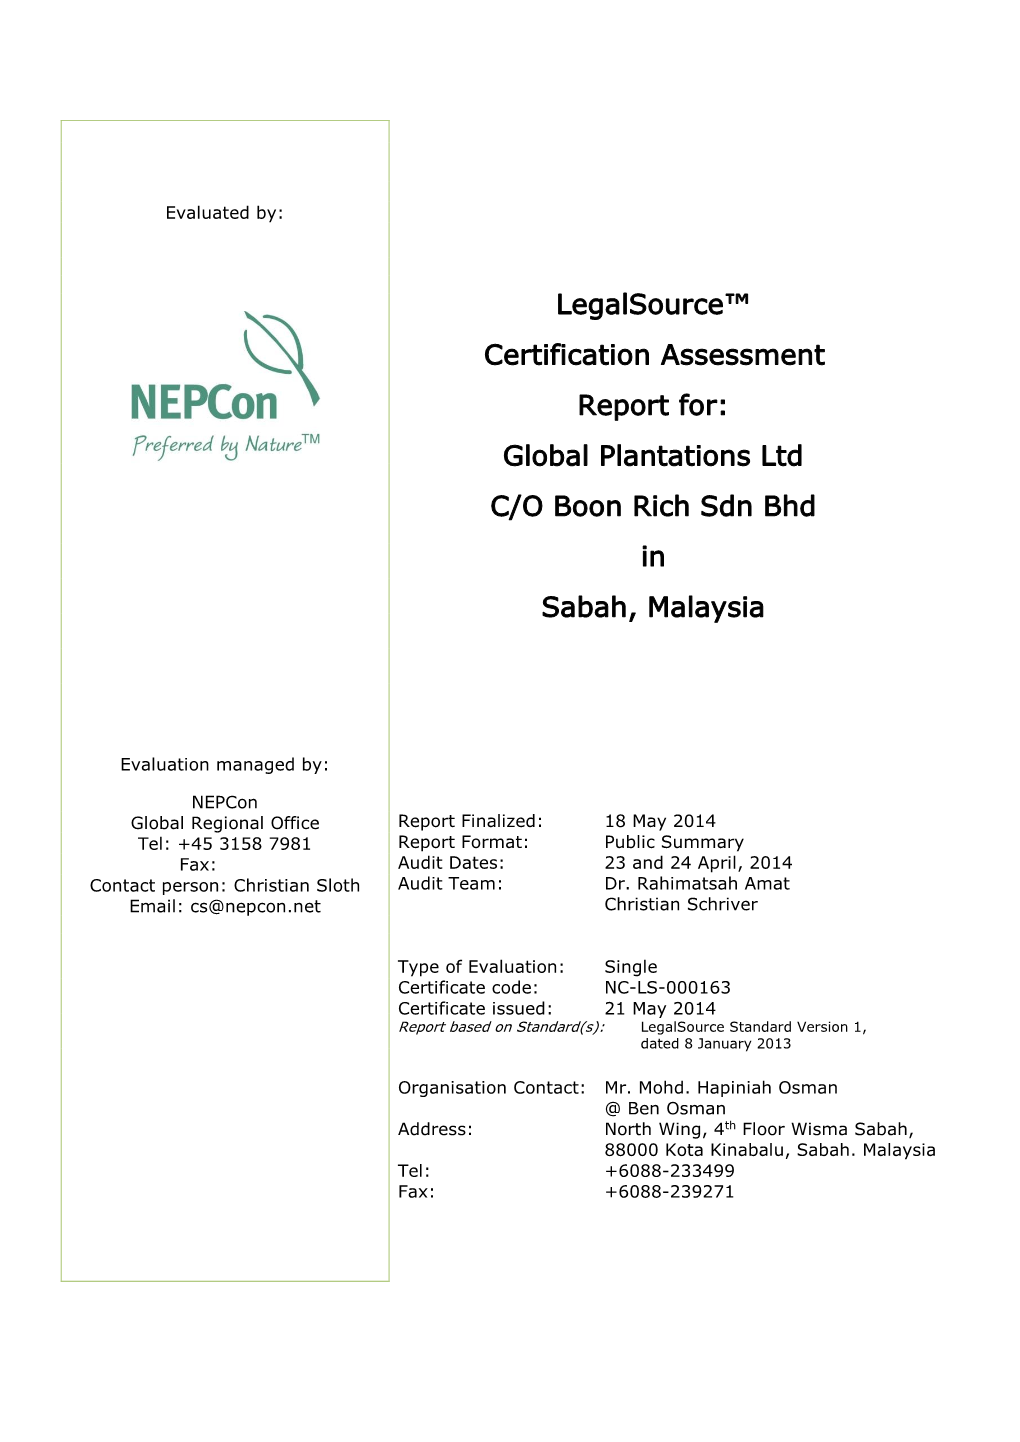 Legalsource™ Certification Assessment Report For: Global Plantations Ltd C/O Boon Rich Sdn Bhd in Sabah, Malaysia